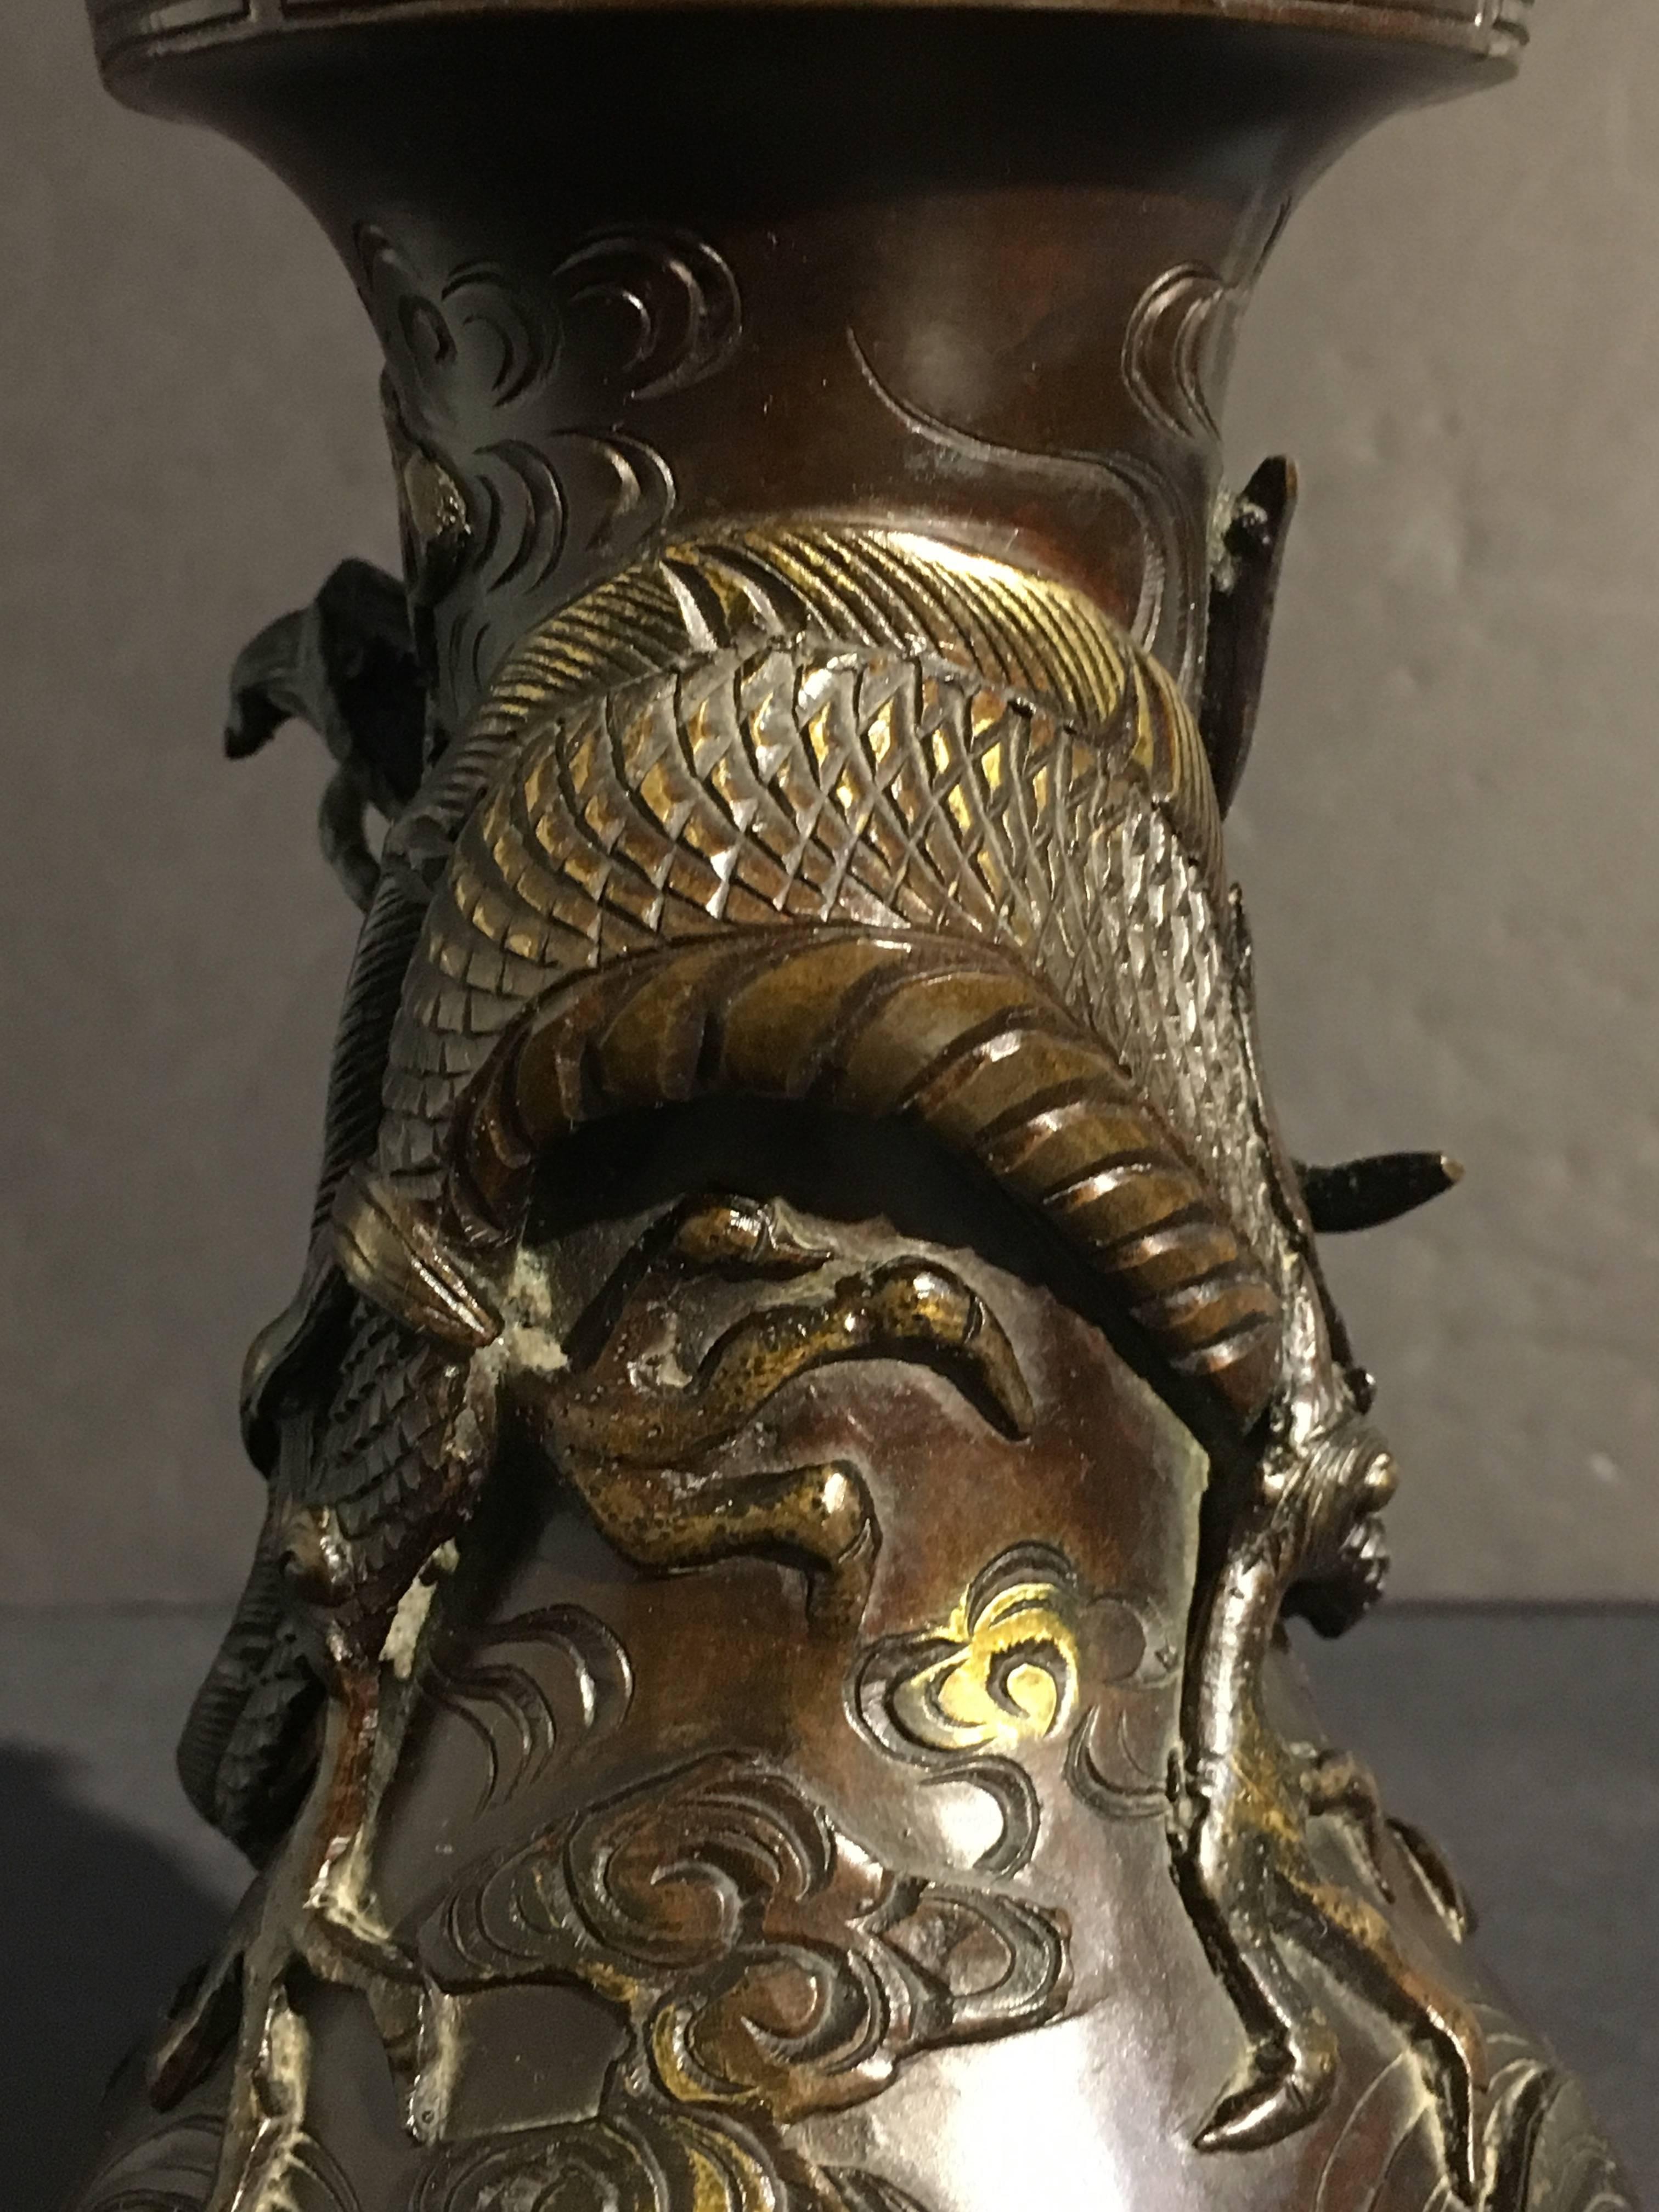 Pair of Japanese Edo Period Parcel-Gilt Bronze Dragon Vases, Early 19th Century For Sale 3